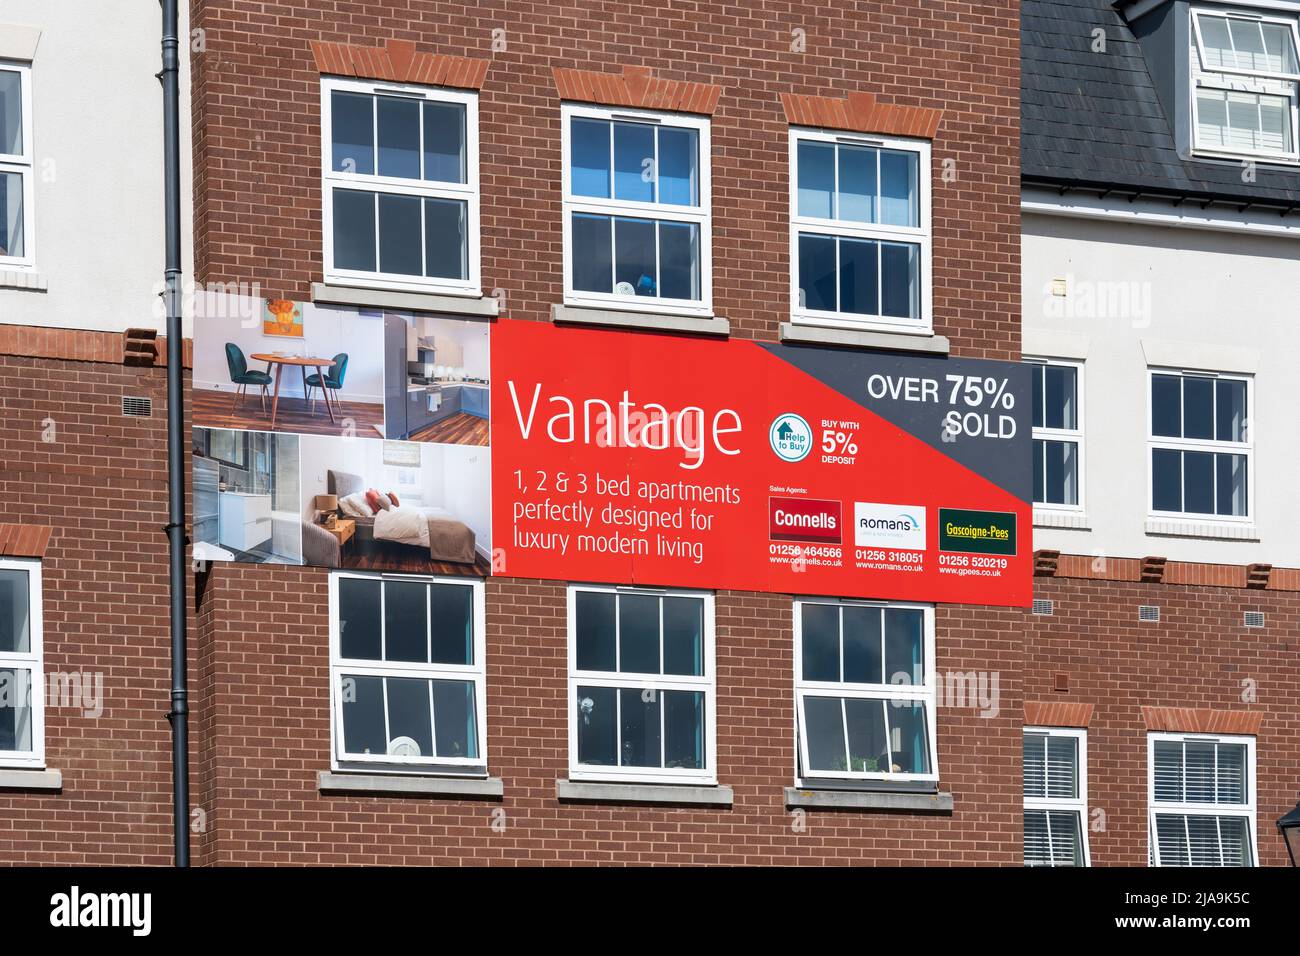 An advertising banner on the outside of Vantage House advertising new 1, 2, 3 bed apartments / flats for sale. Basingstoke town centre, England Stock Photo